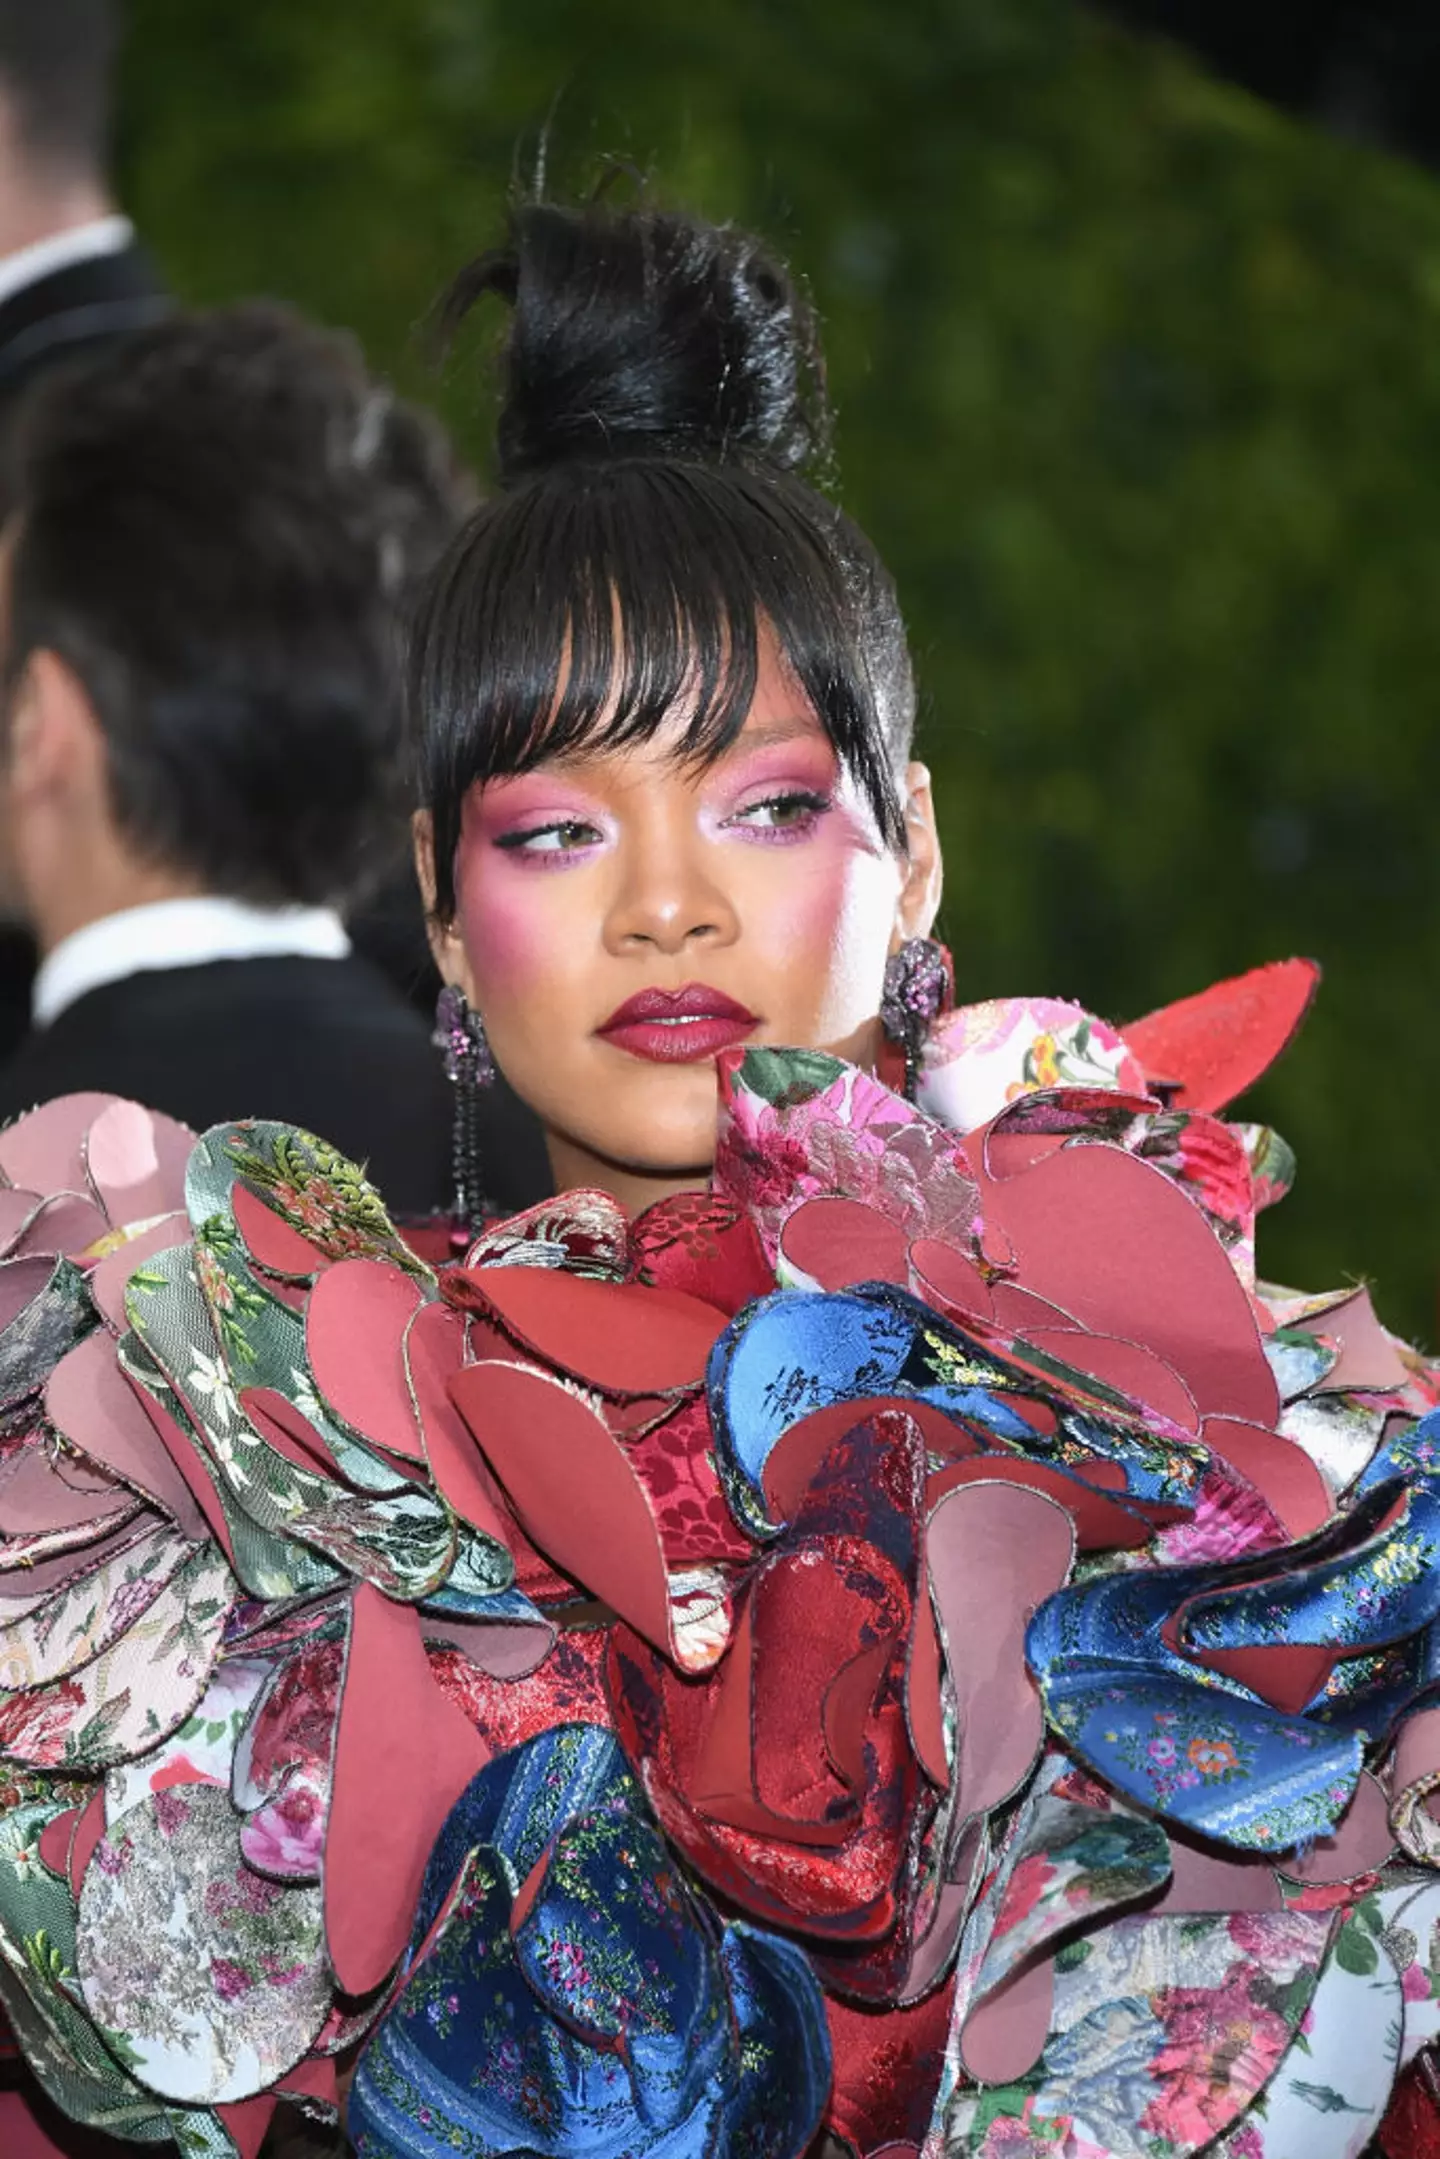 Fans were desperate to see Rihanna at this year's Met Gala. (Dia Dipasupil / Staff / Getty Images)